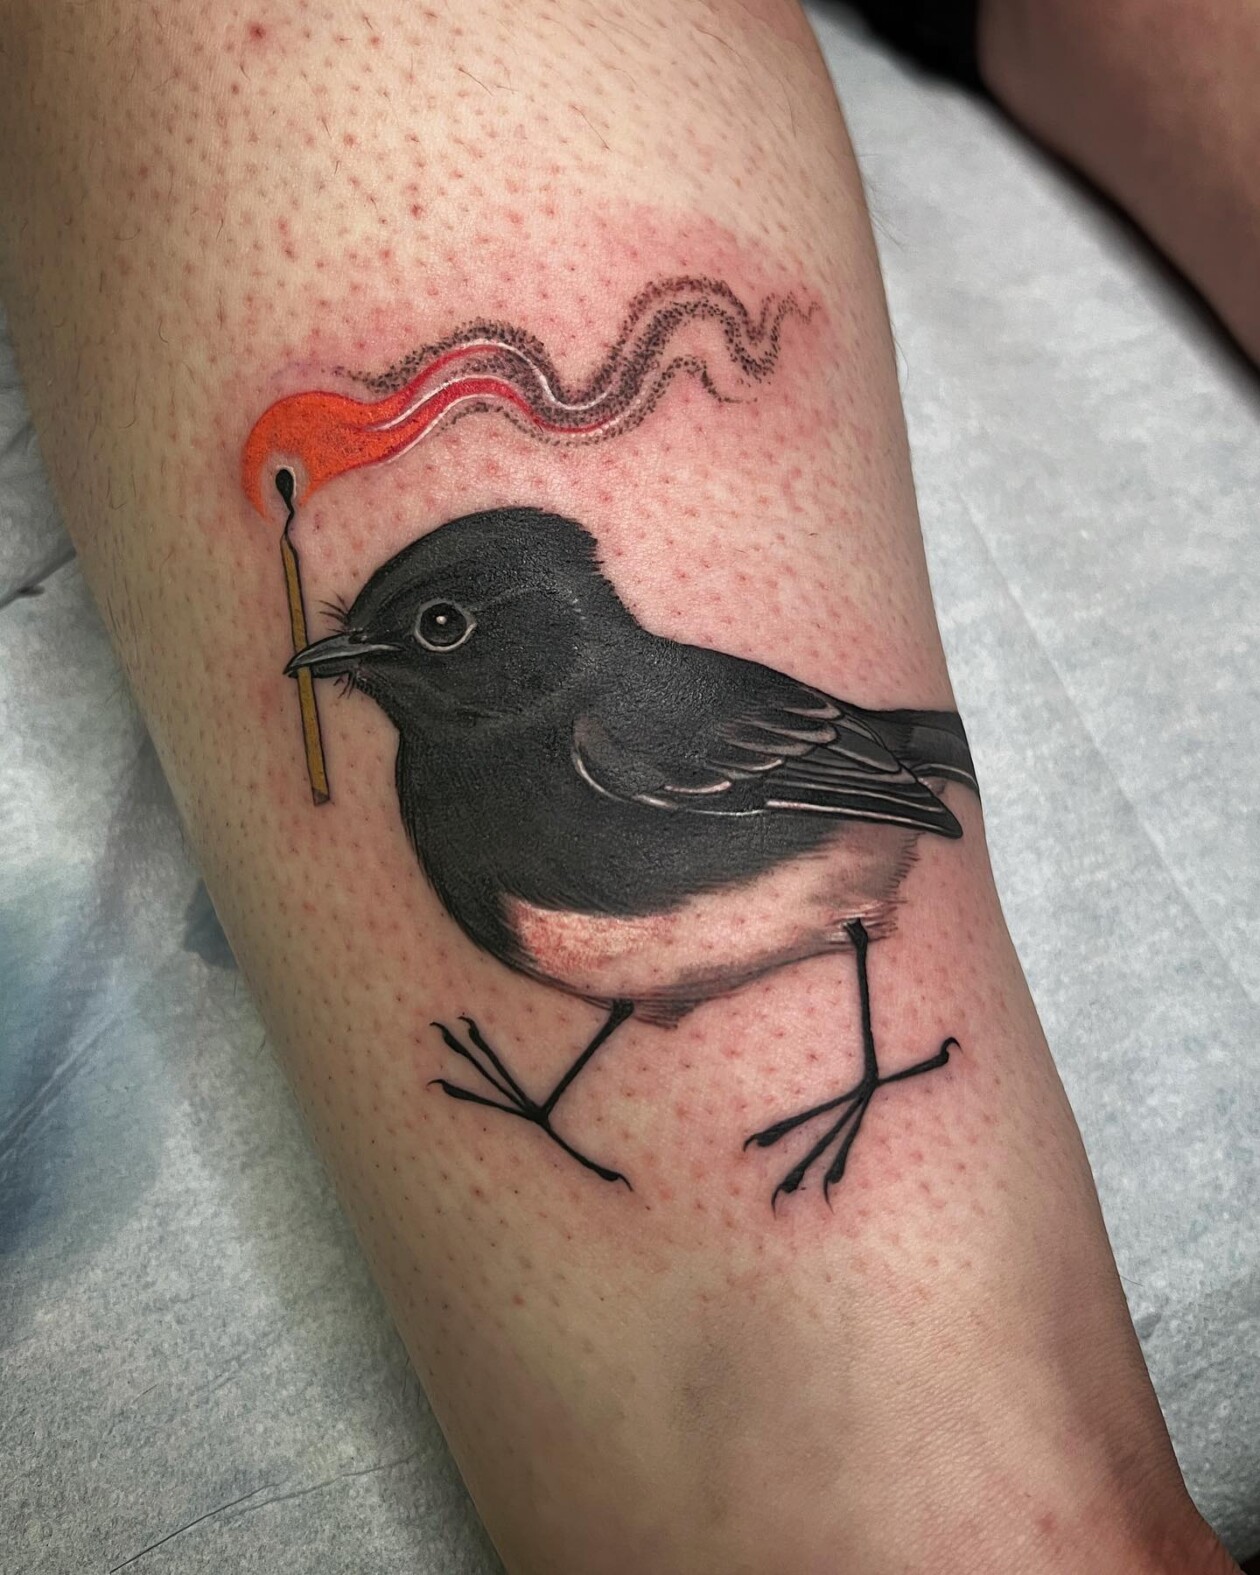 Stephanie Brown Creates Whimsical Tattoos Of Birds Holding A Lit Match Symbolizing Hope For A Better Future (9)